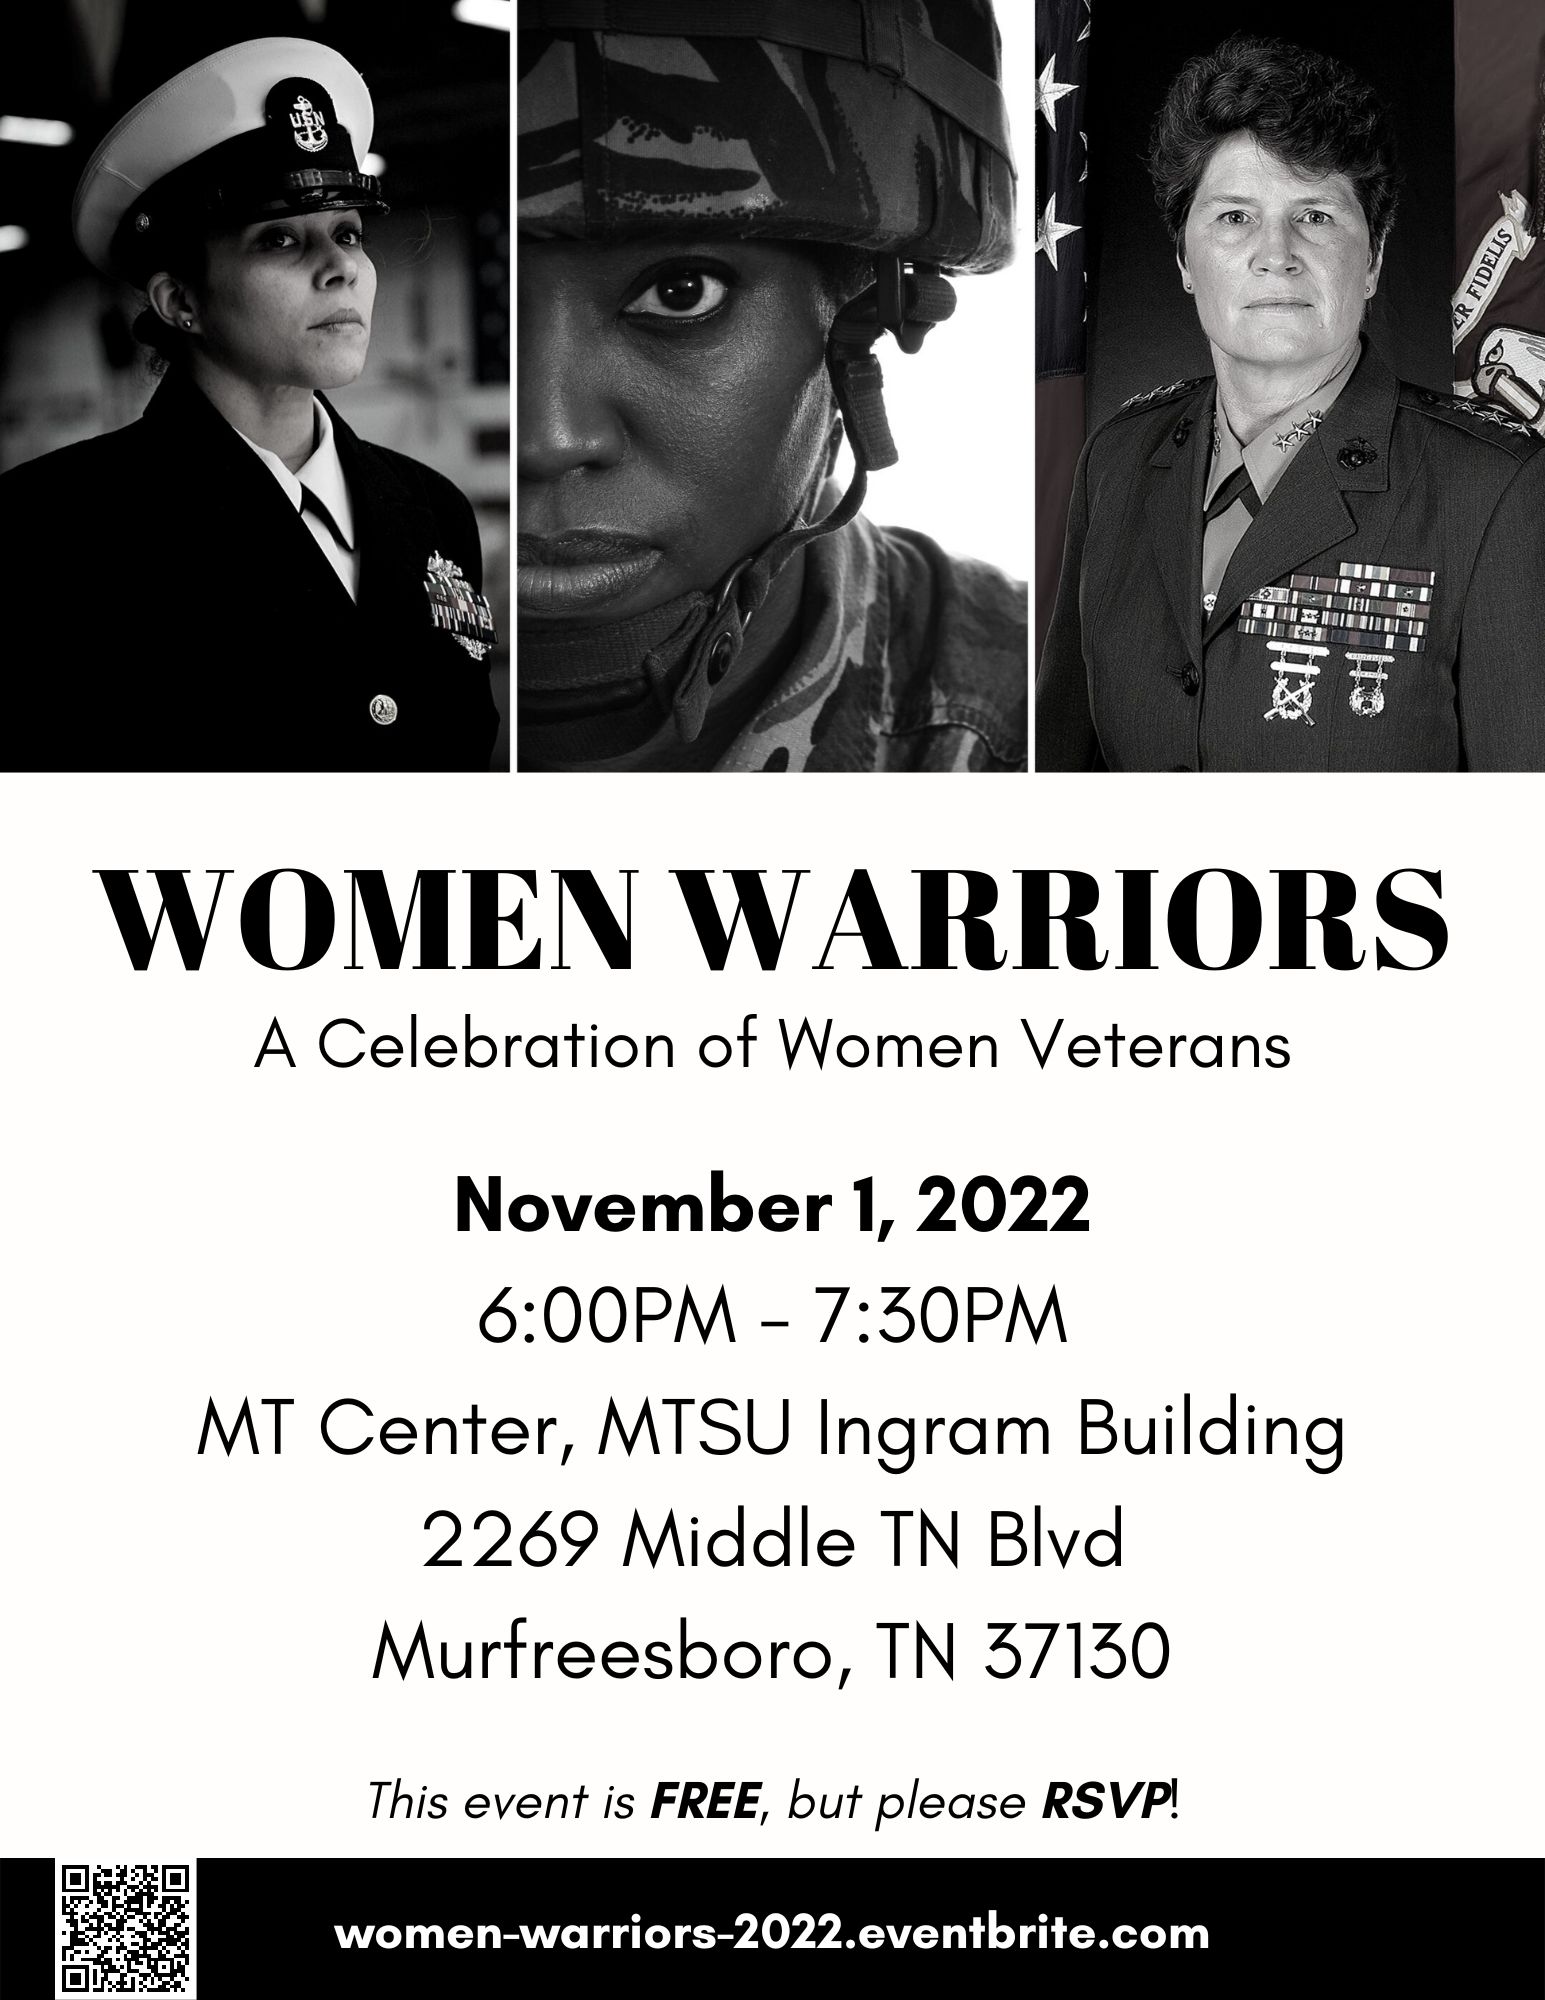 A black and white flyer advertising the Women Warriors event. It features three images of women in military various military uniforms. The event will be held on November 1st, 2022 from 6PM to 7:30PM. It will be in the MT Center of the MTSU Ingram Building located at 2269 Middle TN Blvd, Murfreesboro, TN 37132. The flyer asks for reservations, which can be made online at women-warriors-2022.eventbrite.com